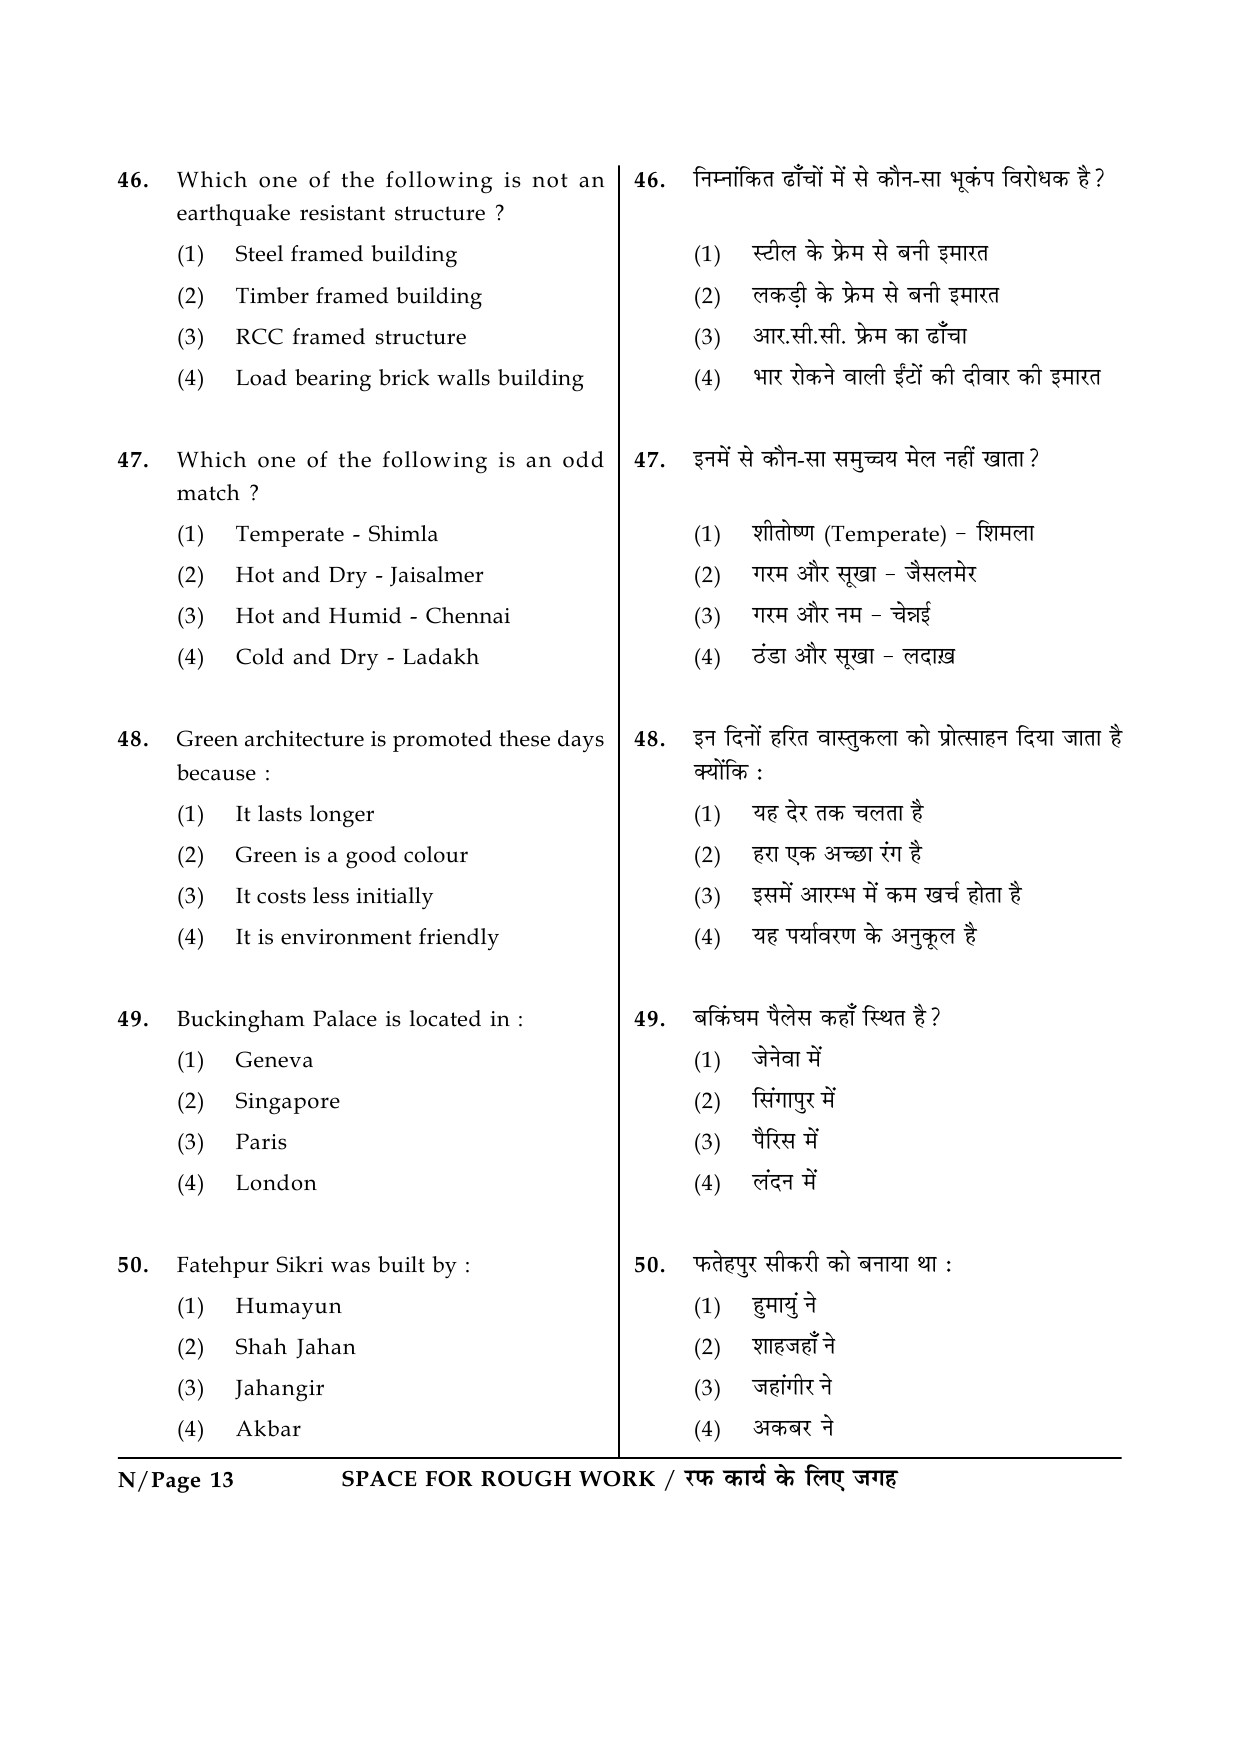 JEE Main Exam Question Paper 2015 Booklet N 13